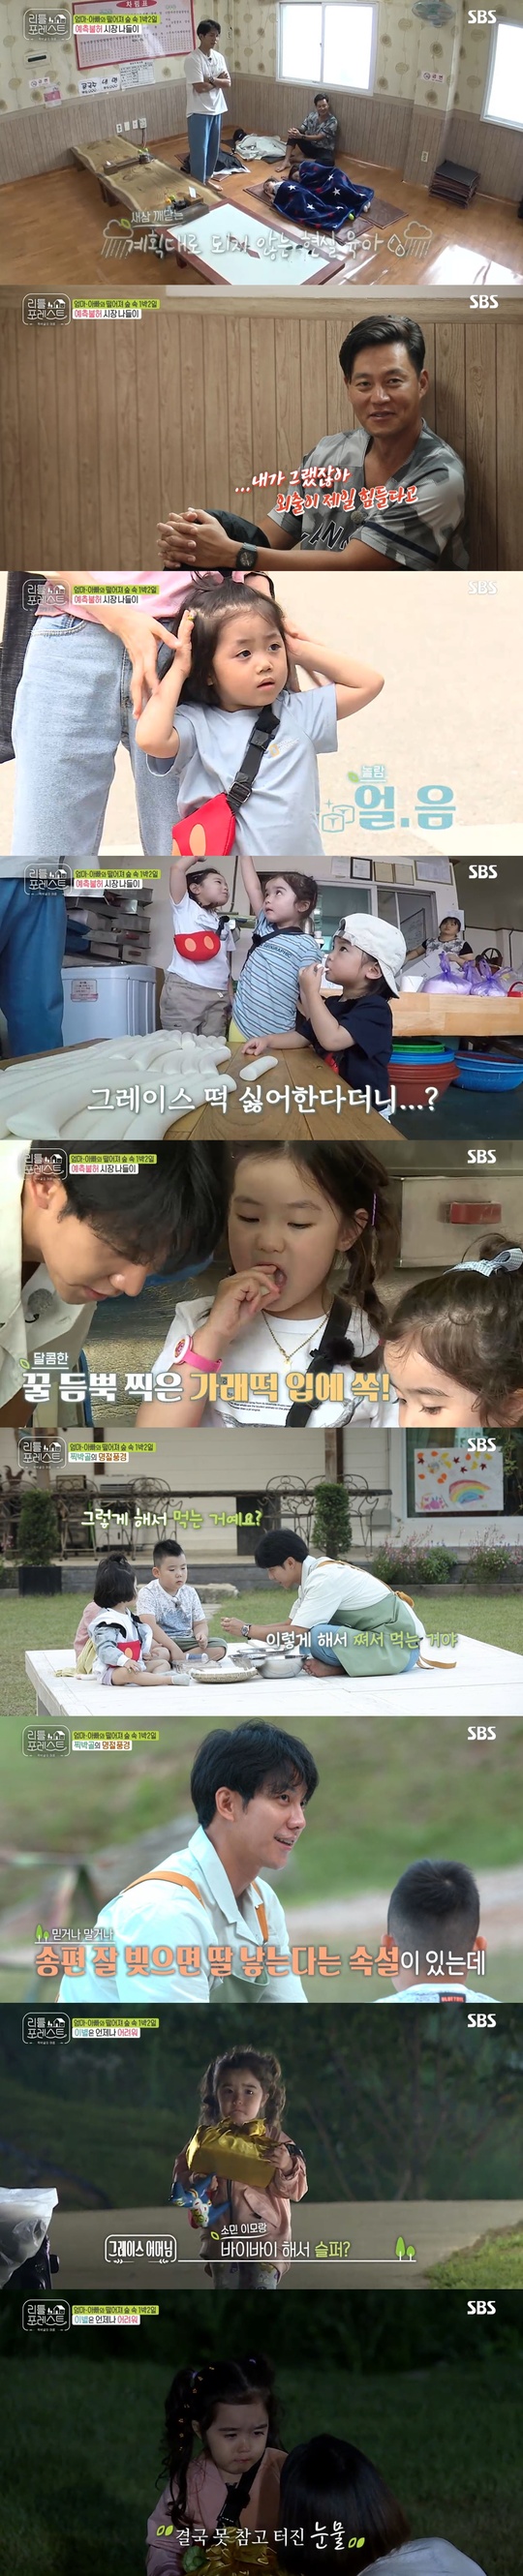 SBS Wall Street Arts Little Forest soared to 6.1% of the highest TV viewer ratings per minute.On September 17, SBS Little Forest depicted Lee Seo-jin, Lee Seung-gi, Park Na-rae and Jung So-min, who were in the market for Chuseok with Little.The carers and the Littles headed to the market to buy the ingredients for the holiday food, and the Littles were excited about the first market outing with The Uncle and Auntie.But the excitement was also a moment, and Lee Seung-gi and Lee Seo-jin lamented that if you have children, there is nothing that you think is going to happen.Lee Seung-gi and Lee Seo-jin sighed when they left Little in the restaurant.In the meantime, Park Na-rae and Jung So-min had a good time watching the process of popping with Lee Han and Ye Jun.Waking up, Eugene, Grace and Gaon headed for the market mill with Lee Seung-gi, who were happy to eat freshly-made rice cakes in honey.Since then, I have bought hot dogs in the market and enjoyed a pleasant outing with lunch together.After returning home after finishing the shopping, they started making Chuseok food such as Songpyeon and the war.Following the demonstration of Lee Seung-gi The Uncle, the master of Songpyeon, Little also participated in the songpyeon debt by sitting on the Onggi bell.The family-like appearance of preparing Chuseok food together made me smile.In particular, Lee Seung-gi said, Is not there a myth that you will have a daughter if you make a songpyeon well?Little Lee enjoyed a generous dinner with the finished Songpyeon and Chuseok food.kim myeong-mi